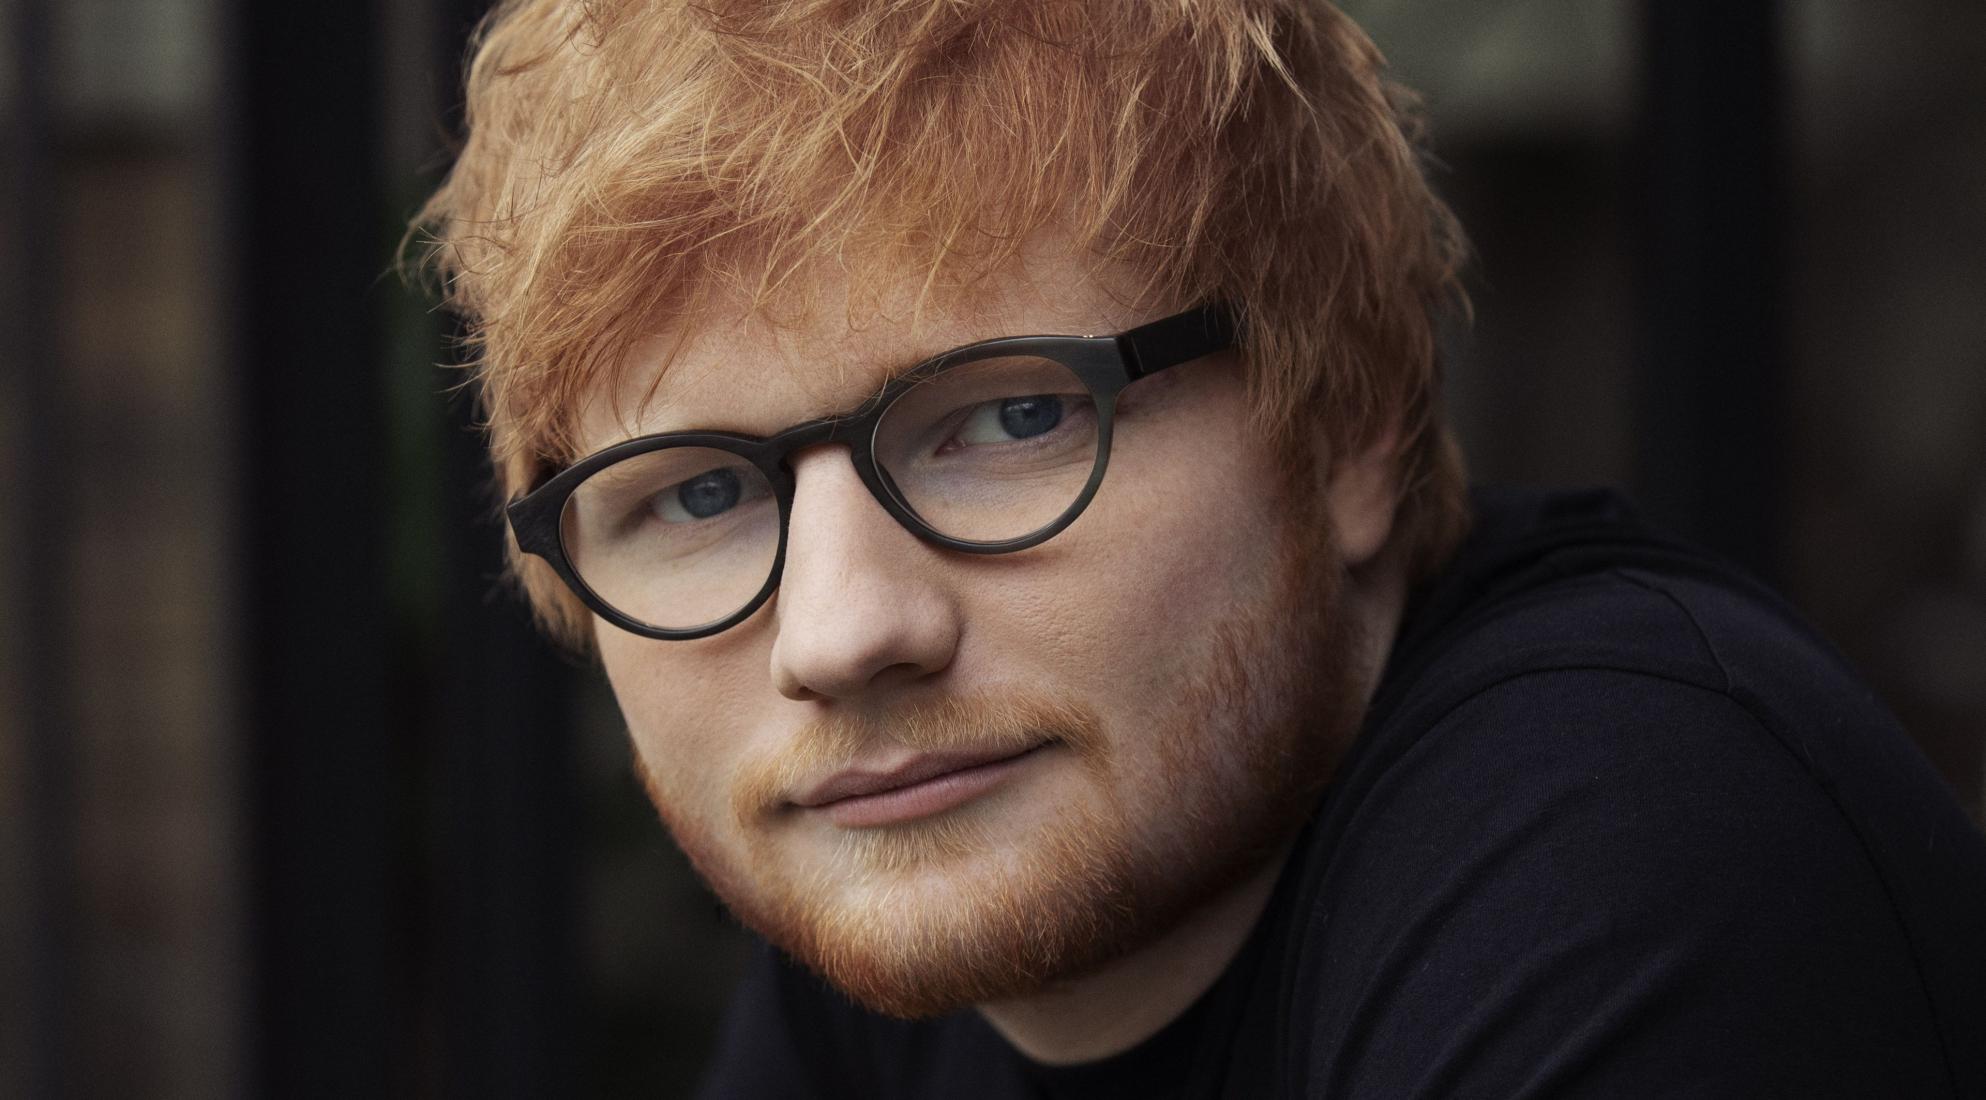 Sheeran Got the Allegedly Copying Gaye’s ‘Let’s Get It On’